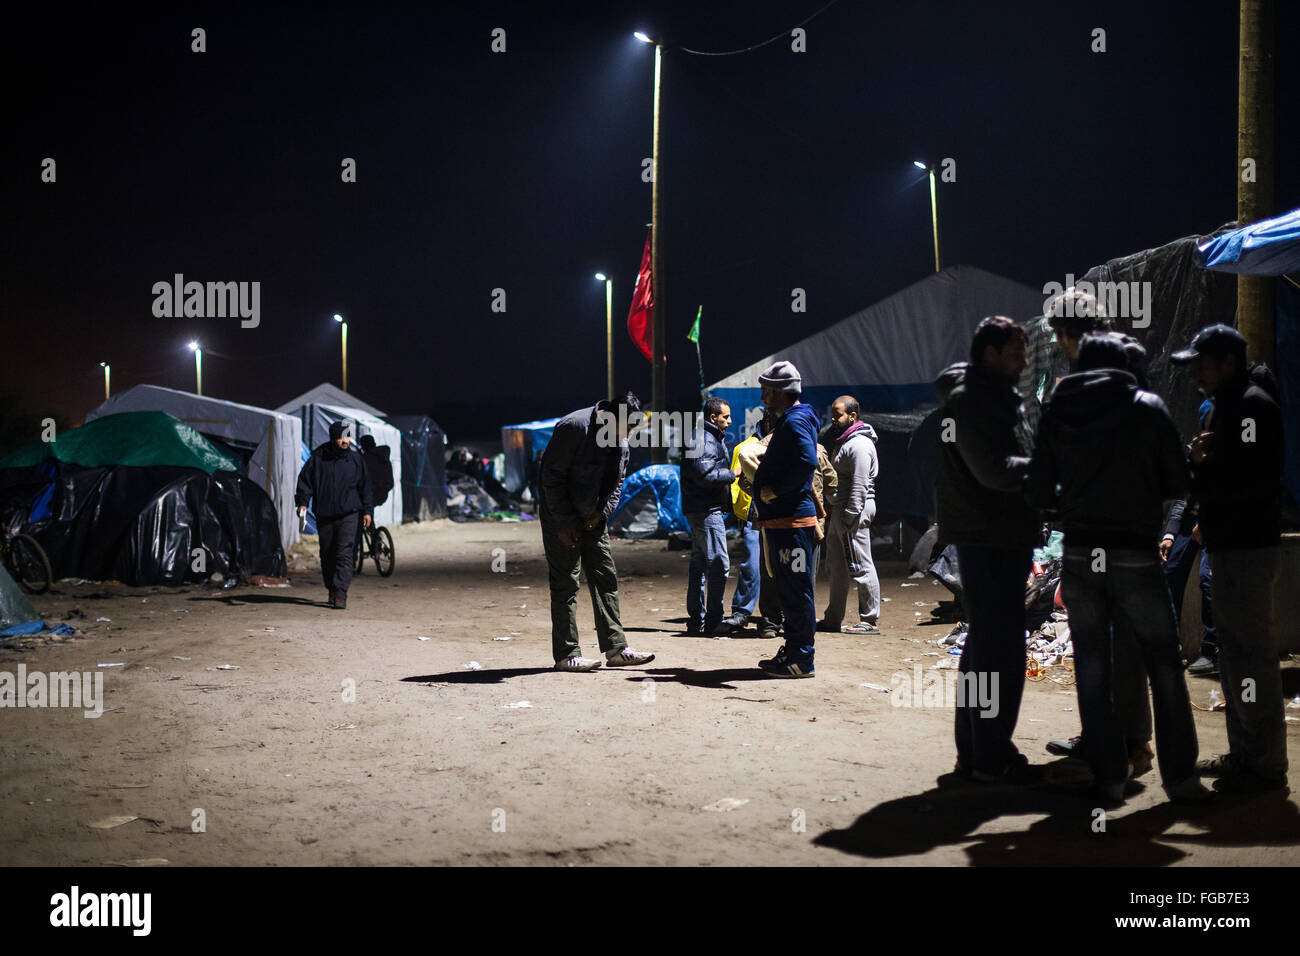 Refugees and migrants in the main street of the Jungle refugee camp in Calais, France Stock Photo